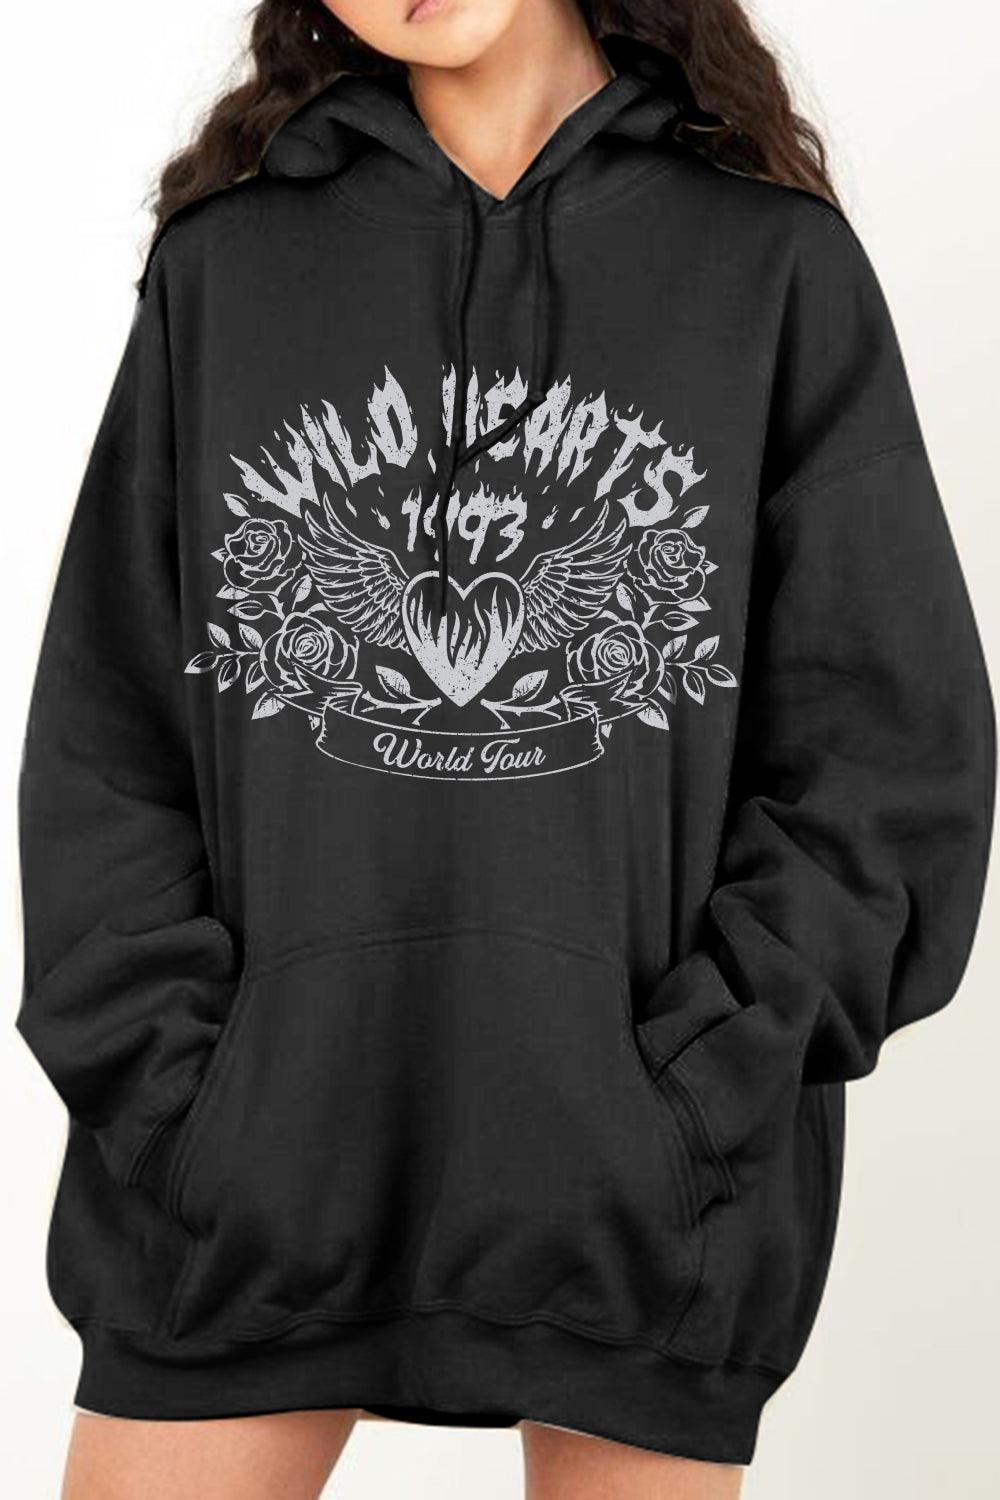 Simply Love Simply Love Full Size WILD HEARTS 1993 WORLD TOUR Graphic Hoodie - Lucianne Boutique